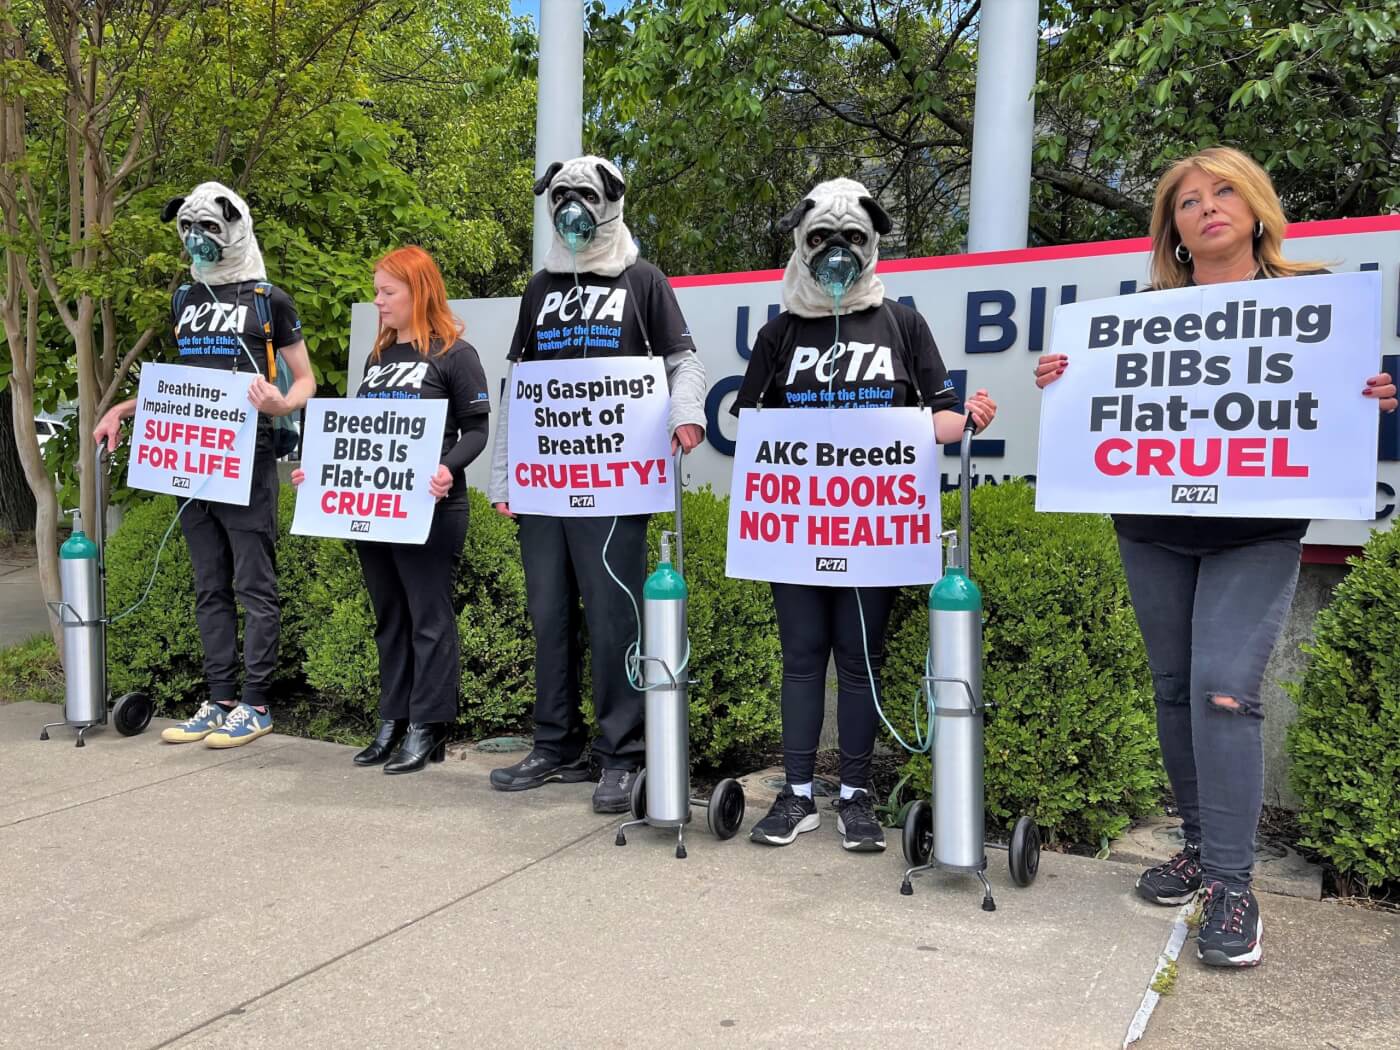 Protesters wearing pug masks holding signs against BIBs outside dog show